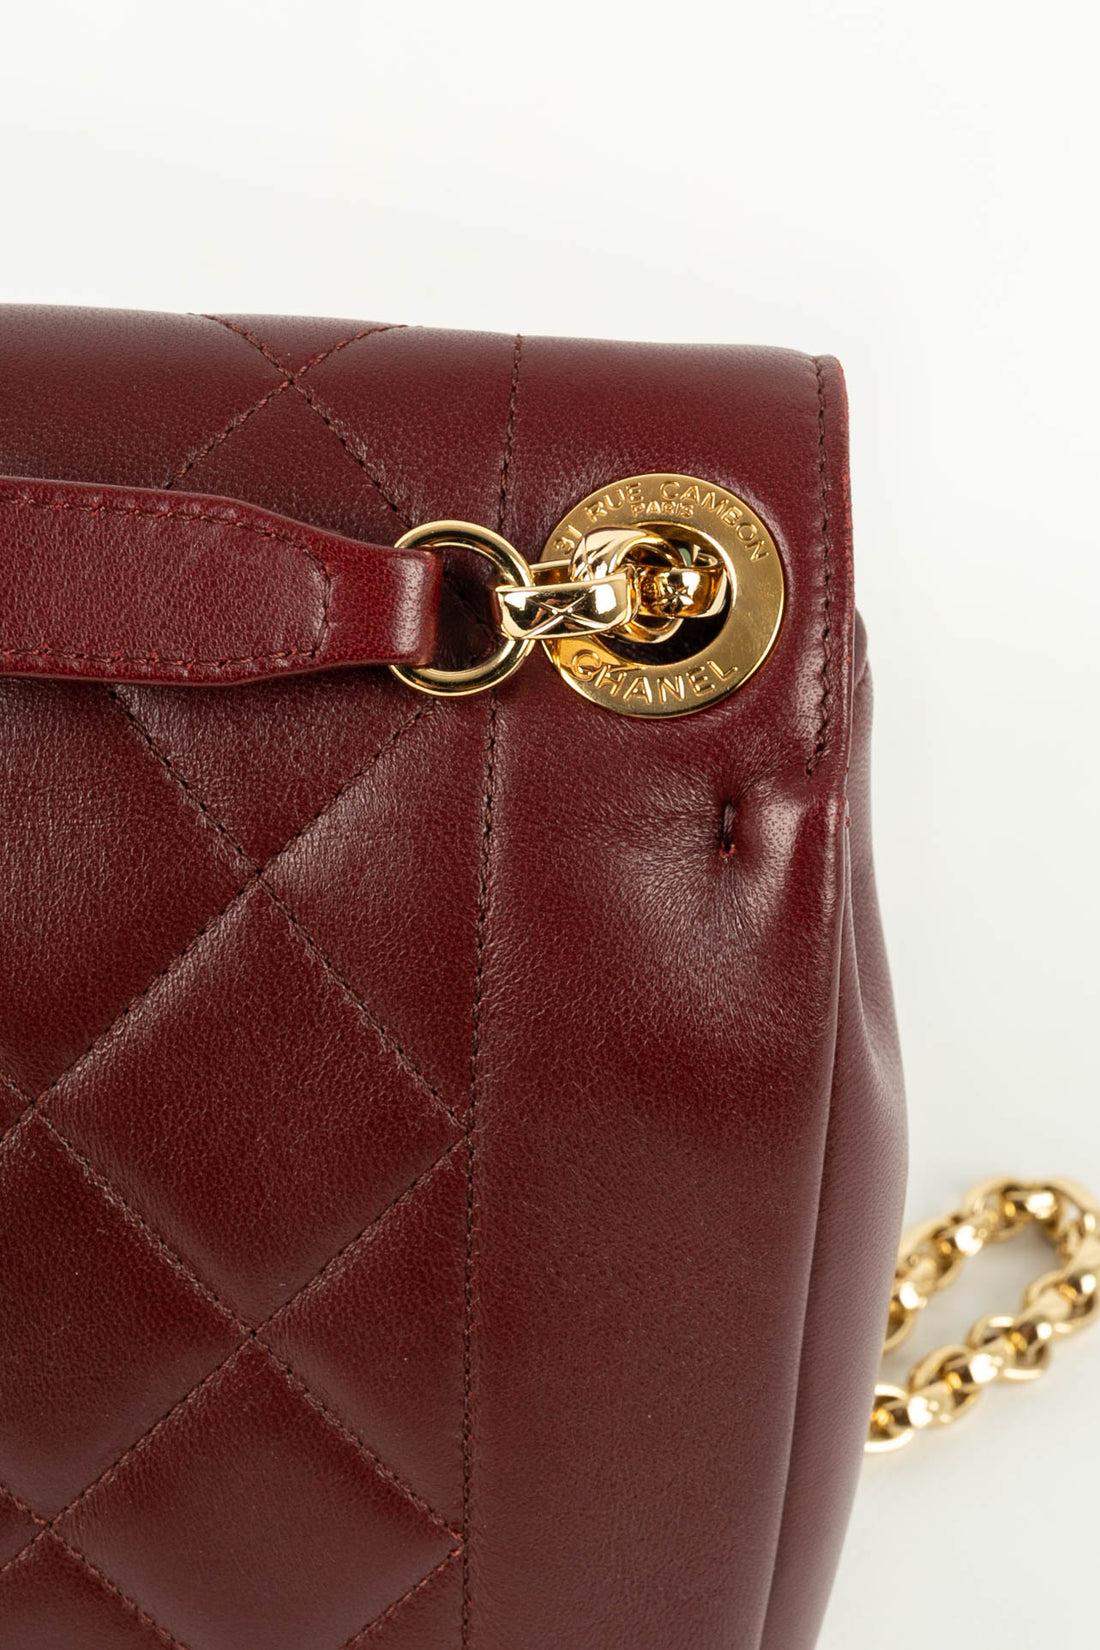 Chanel Burgundy Quilted Leather Bag, 2013/2014 For Sale 3